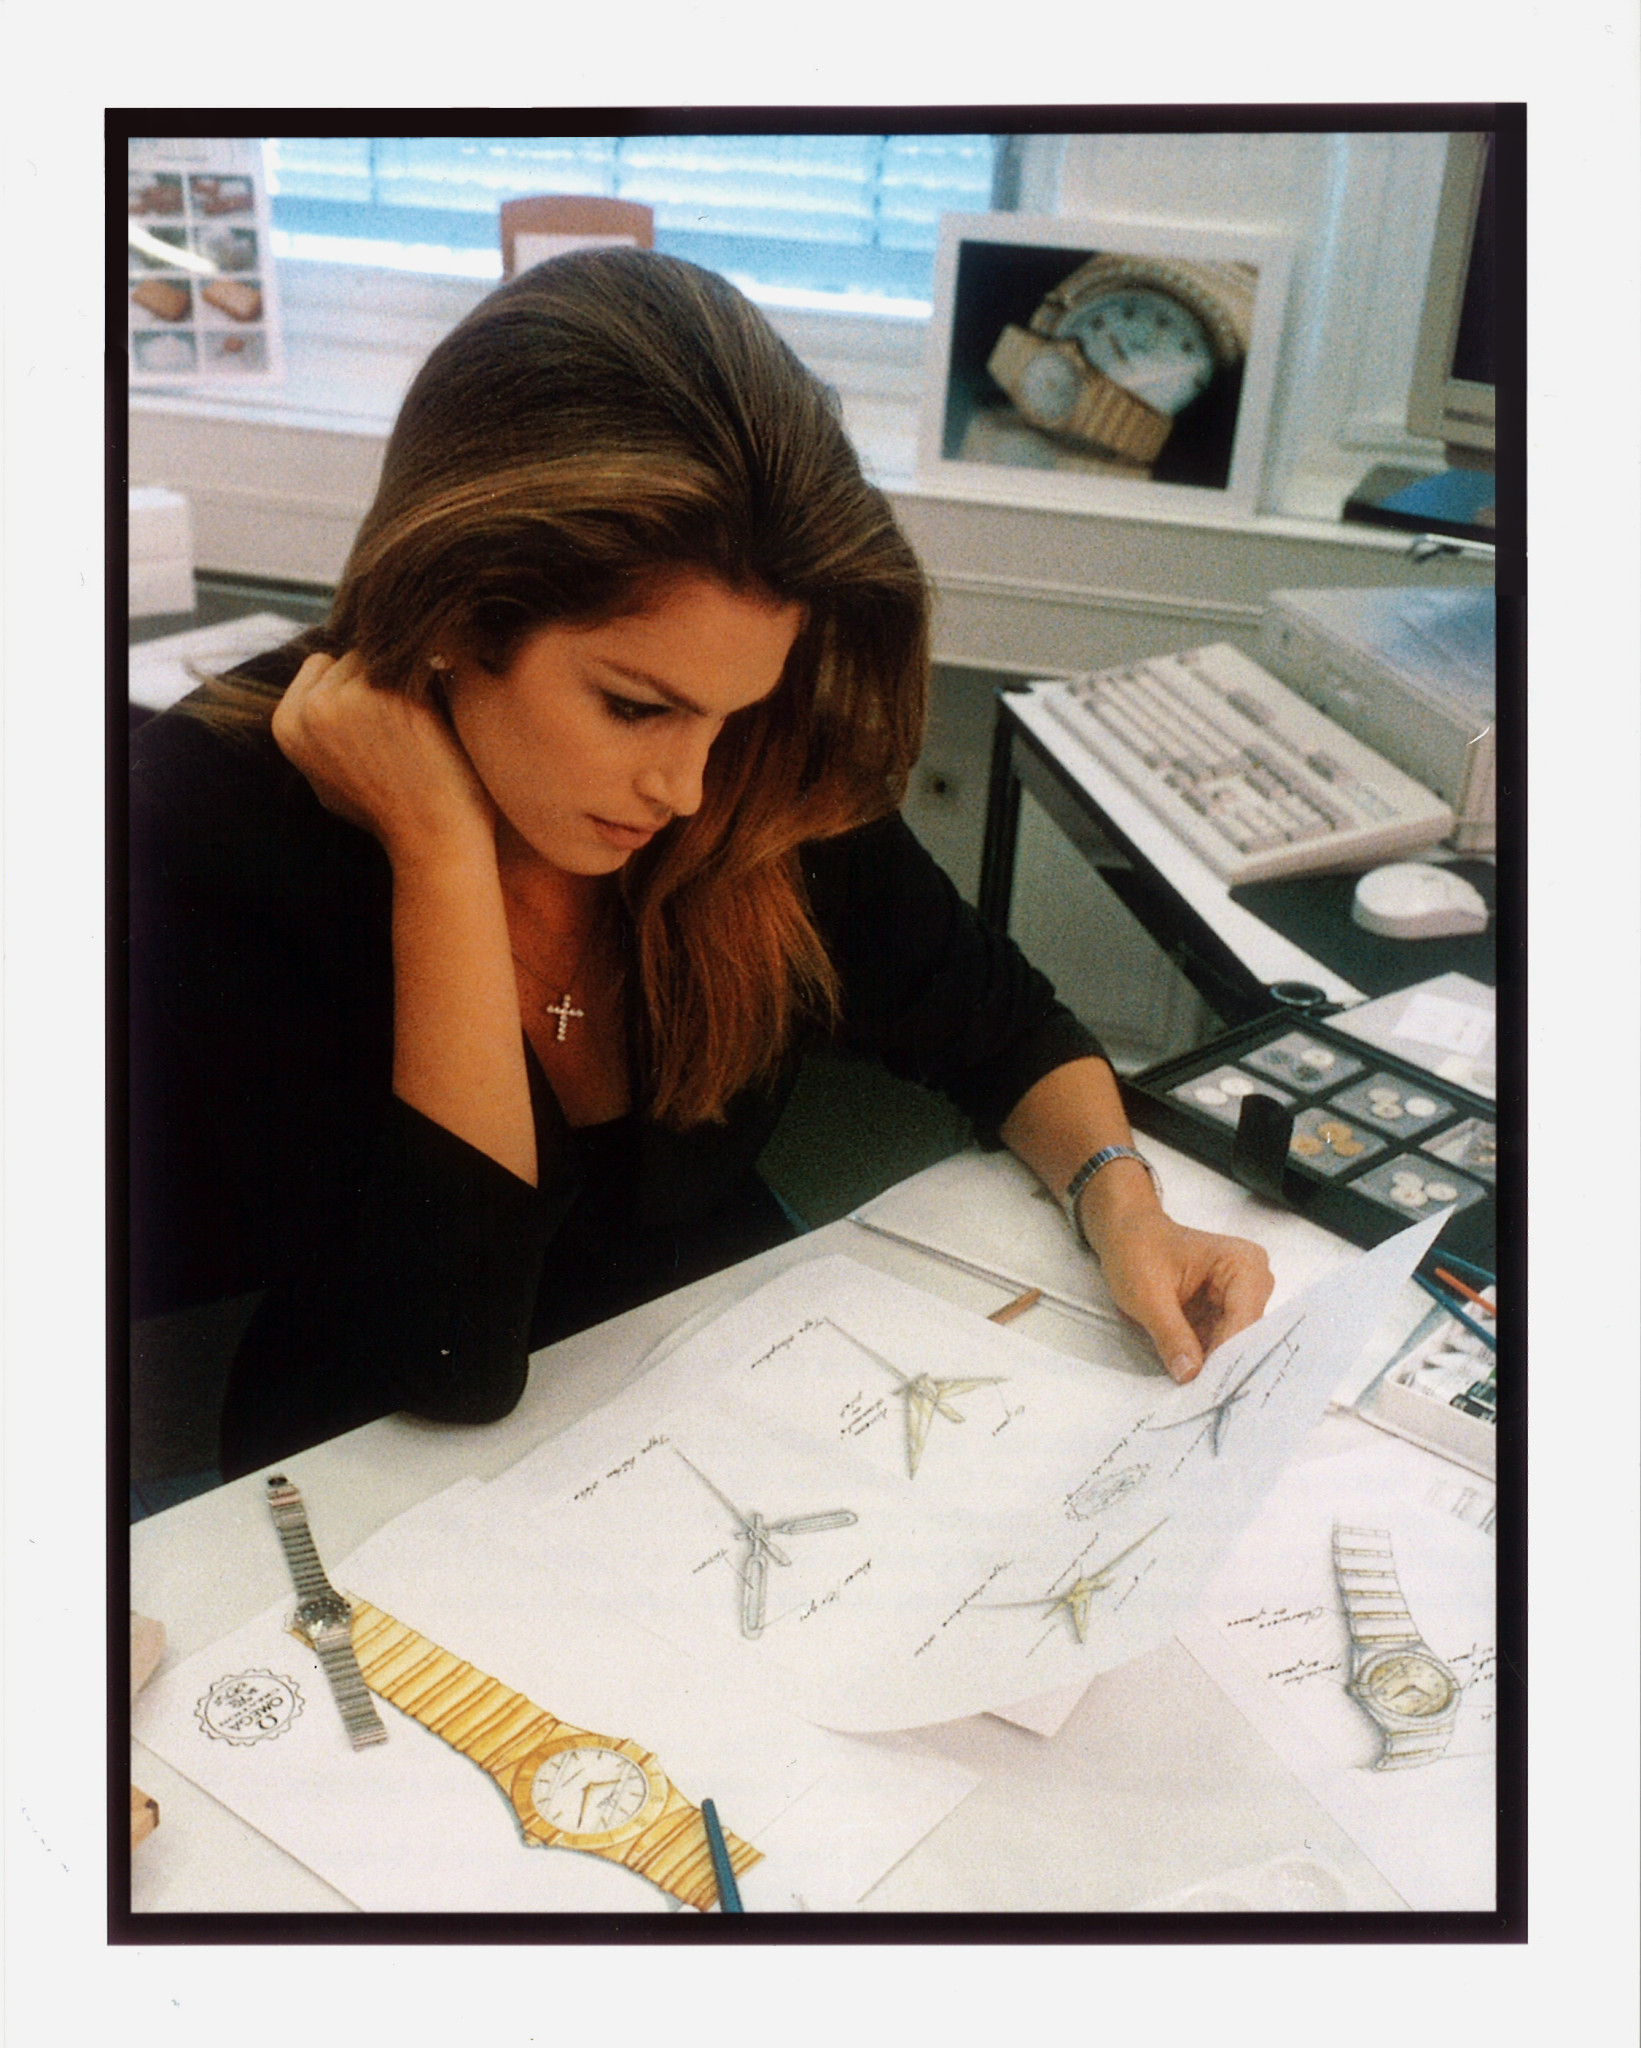 1996 cindy crawford working on the constellation design at omega in bienne 1